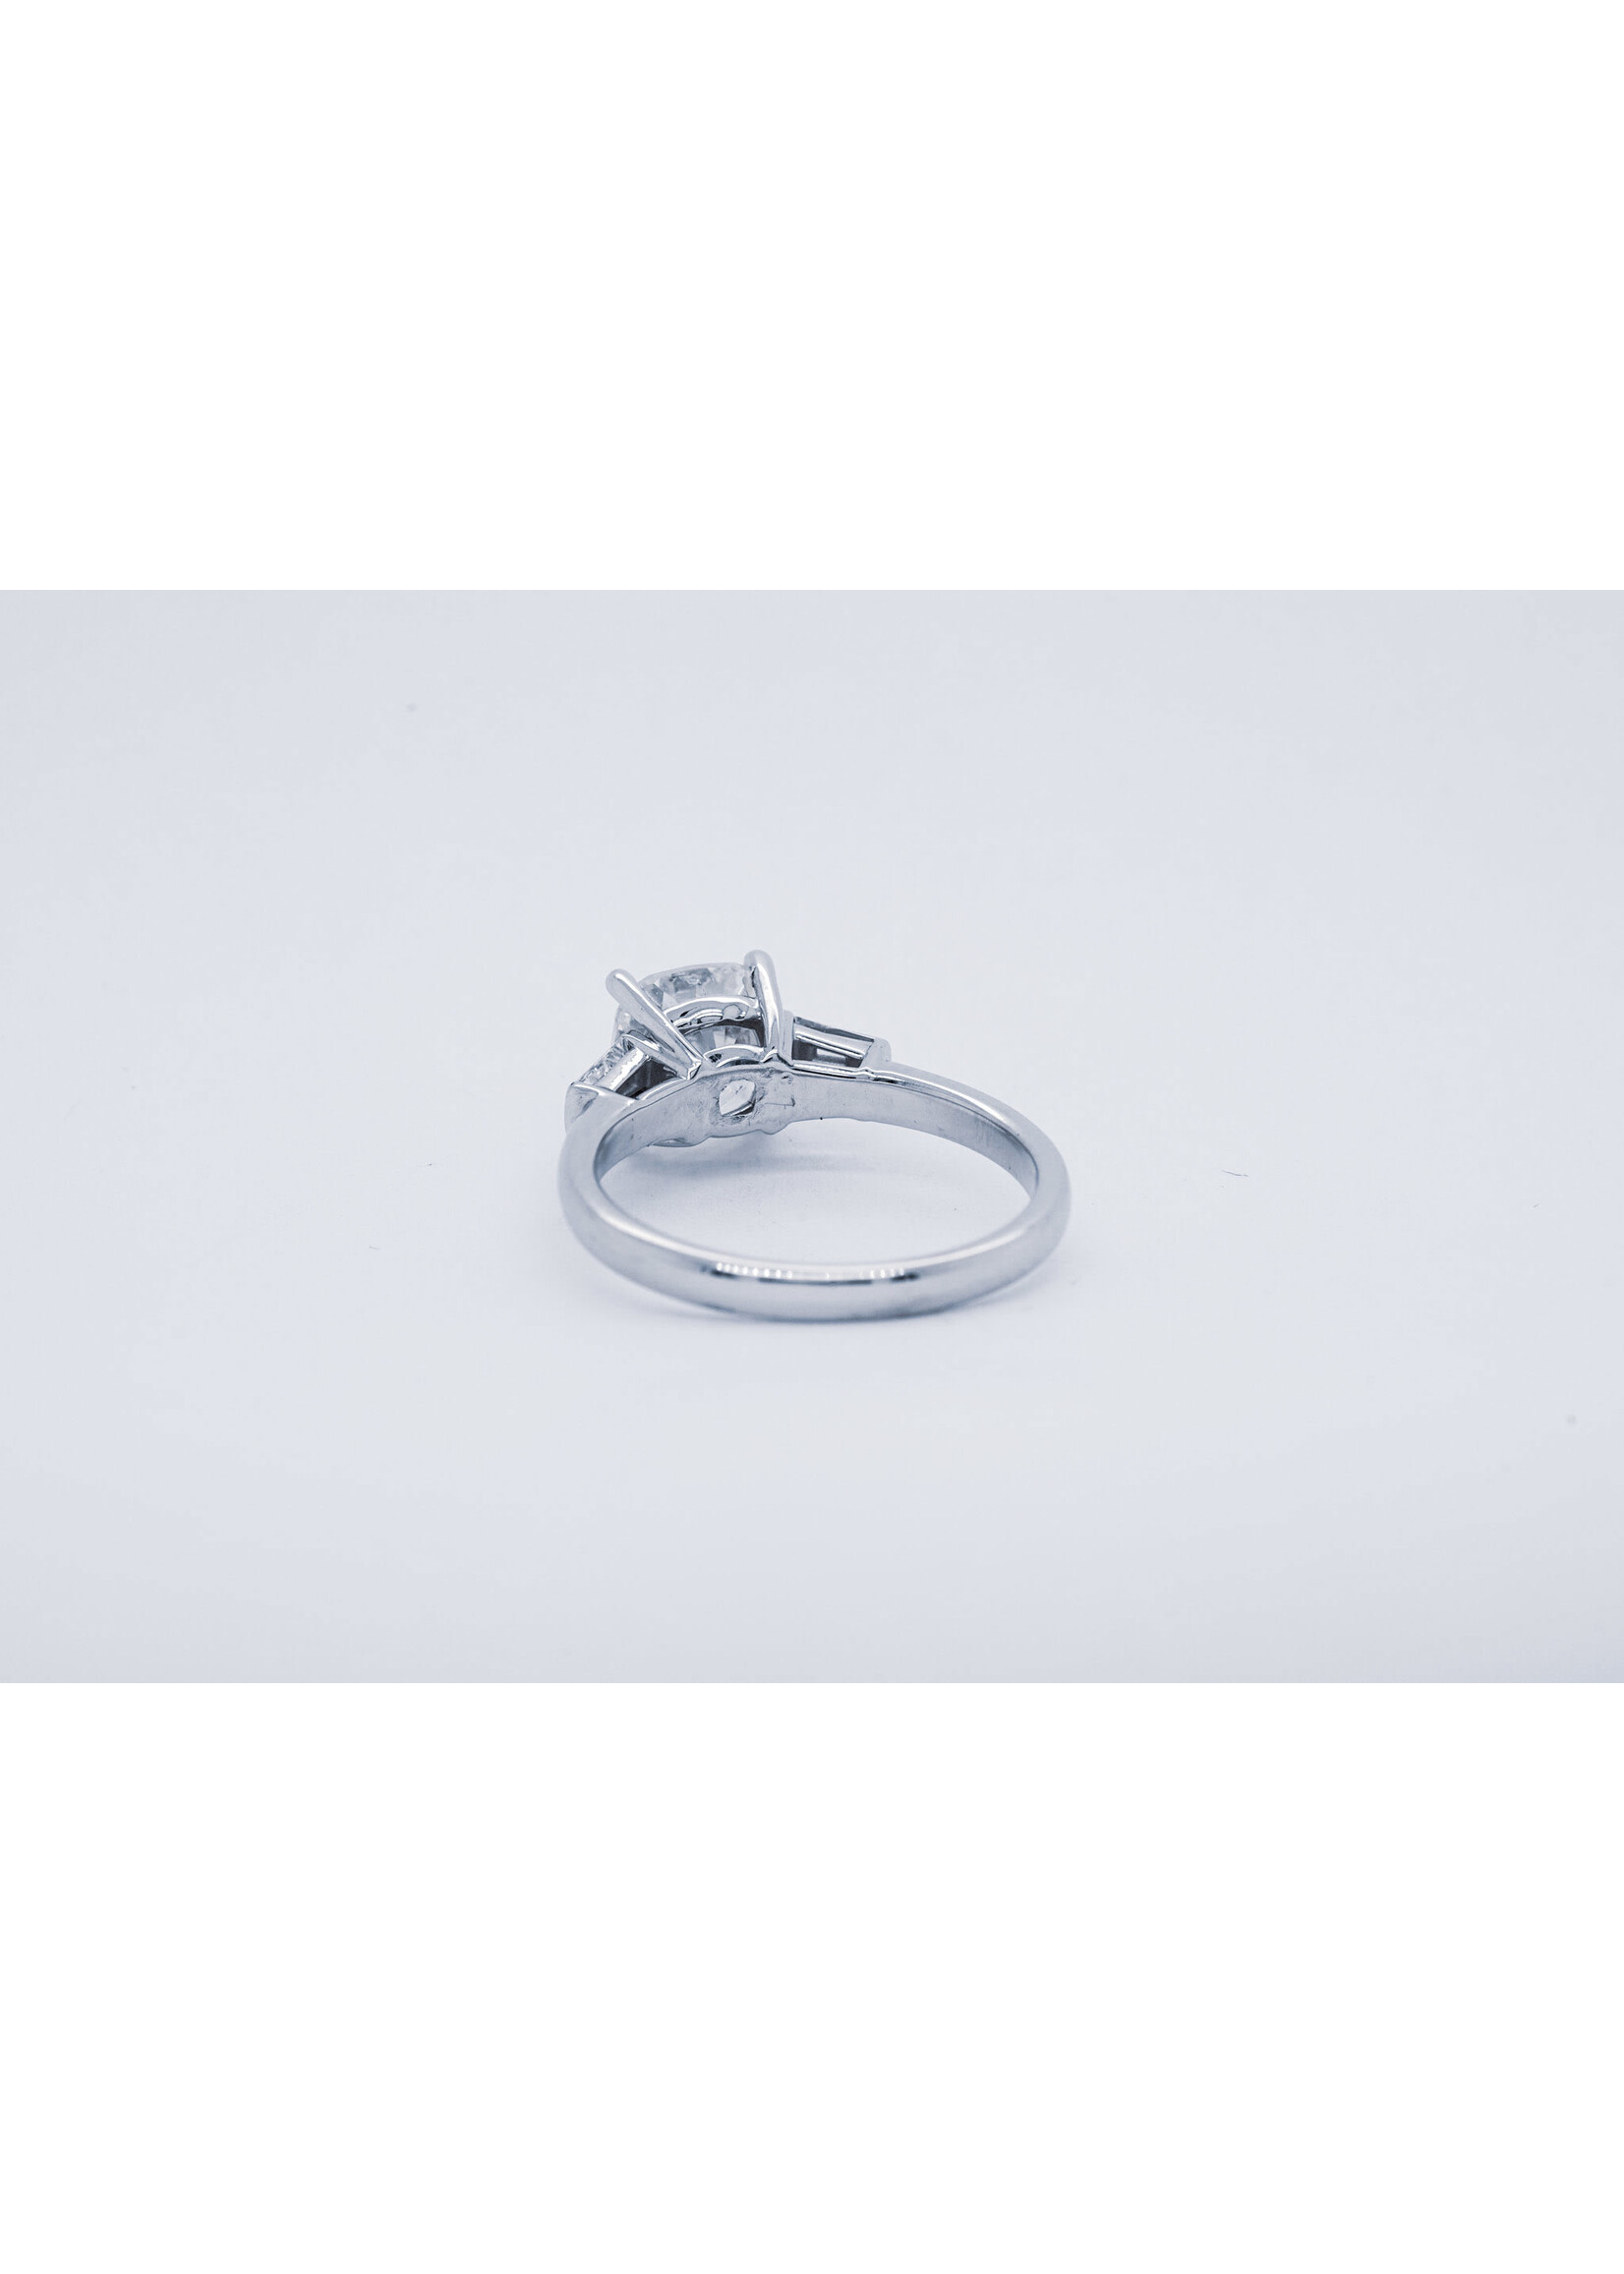 14KW 3.56g 2.42ctw (2.12ctr) I/I1 Cushion and Baguette Diamond Engagement Ring (size 7)